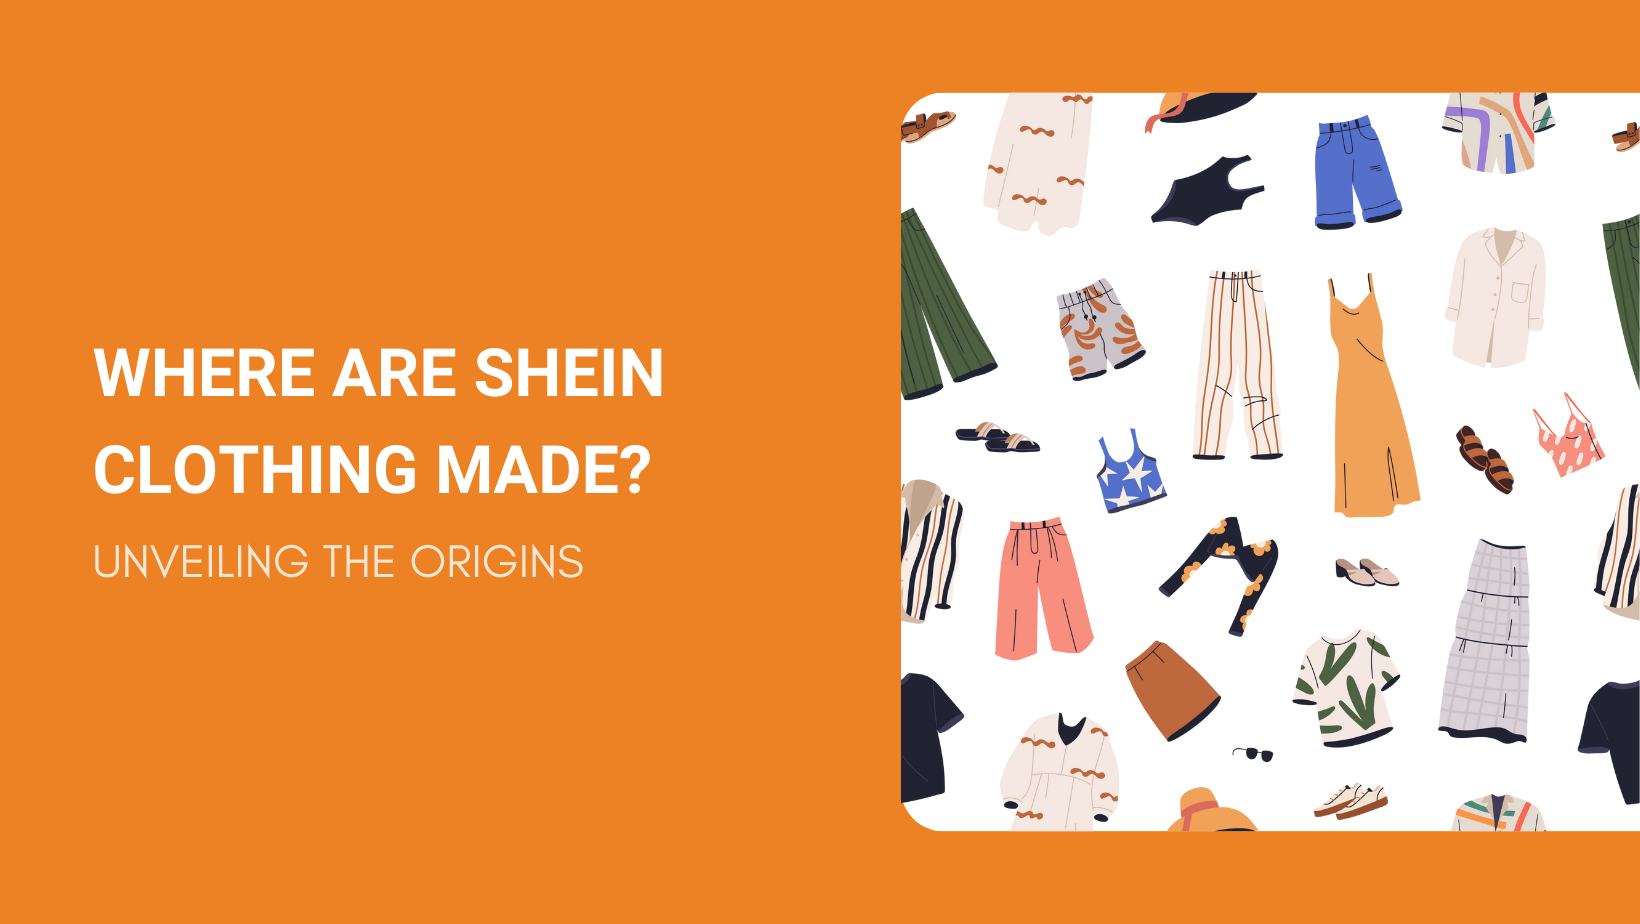 Where Are Shein Clothing Made? Unveiling the Origins